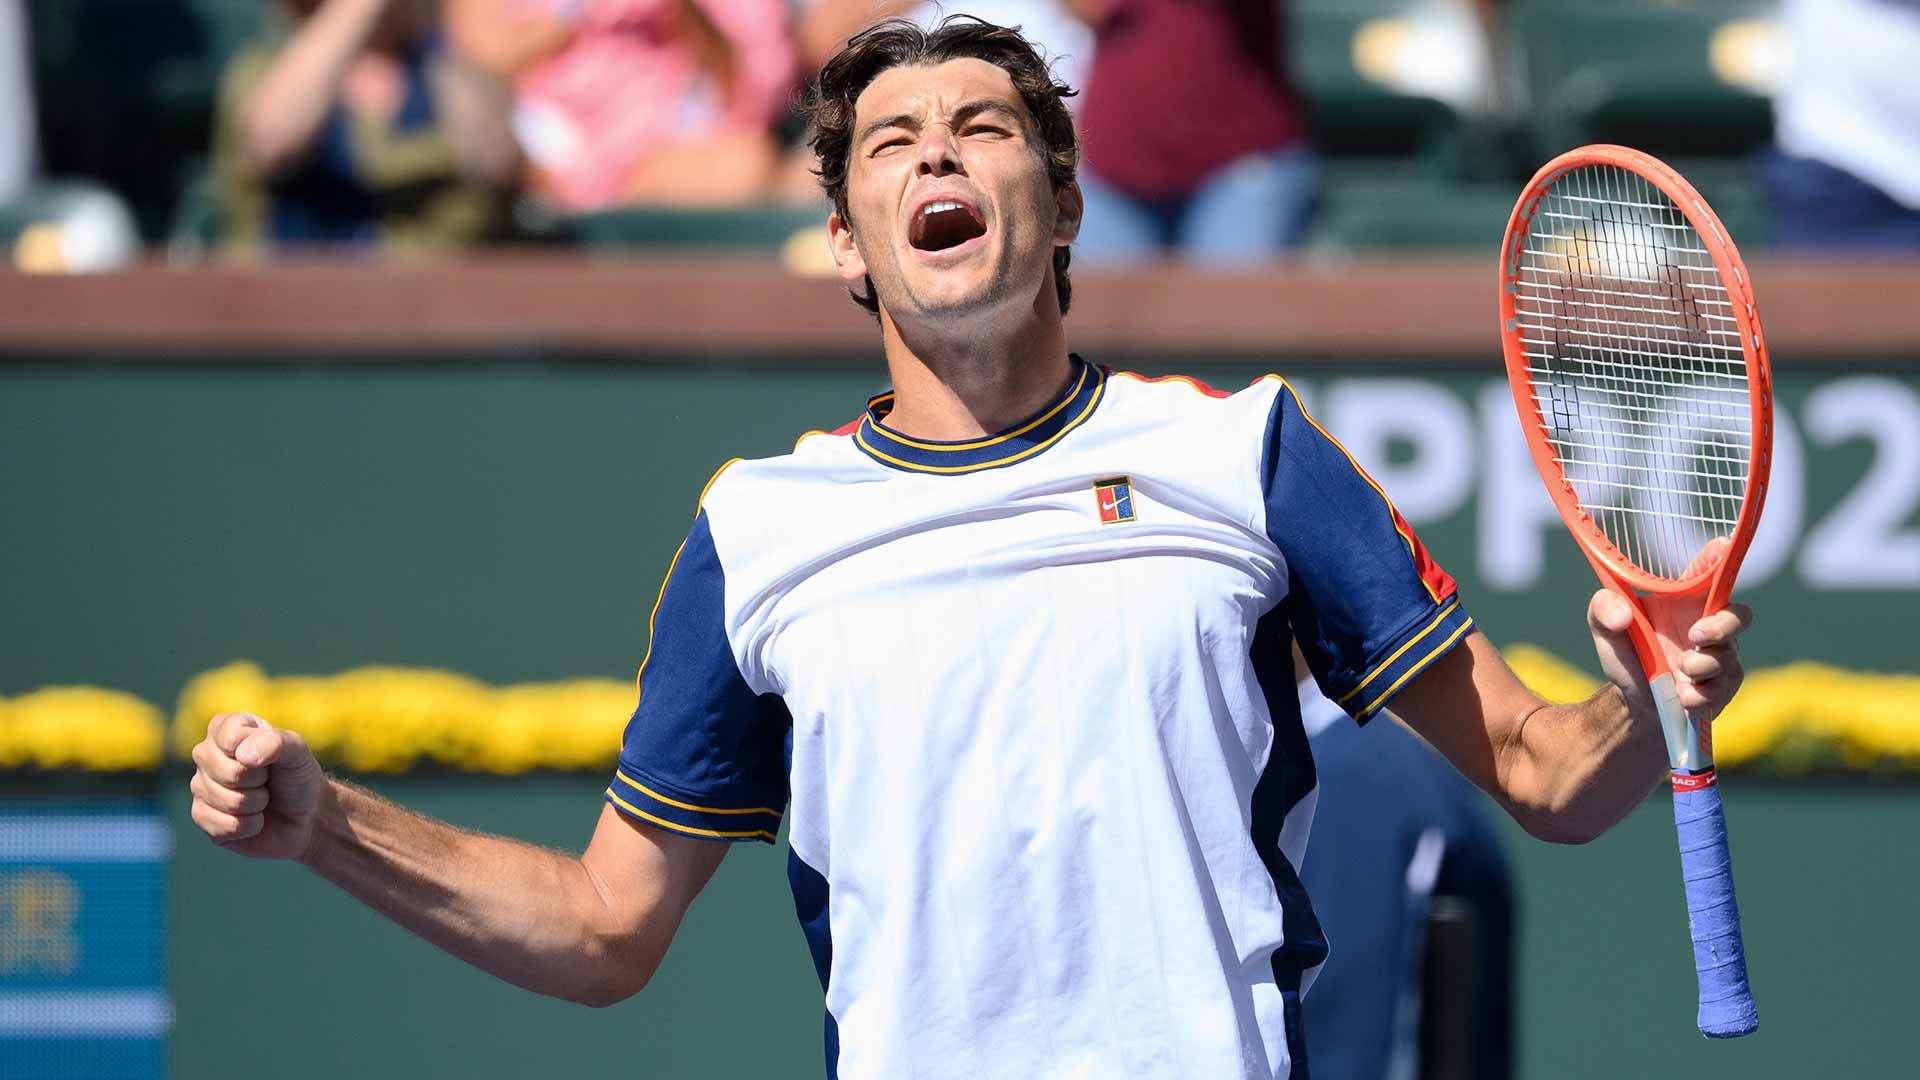 Taylor Fritz Shouting In Victory